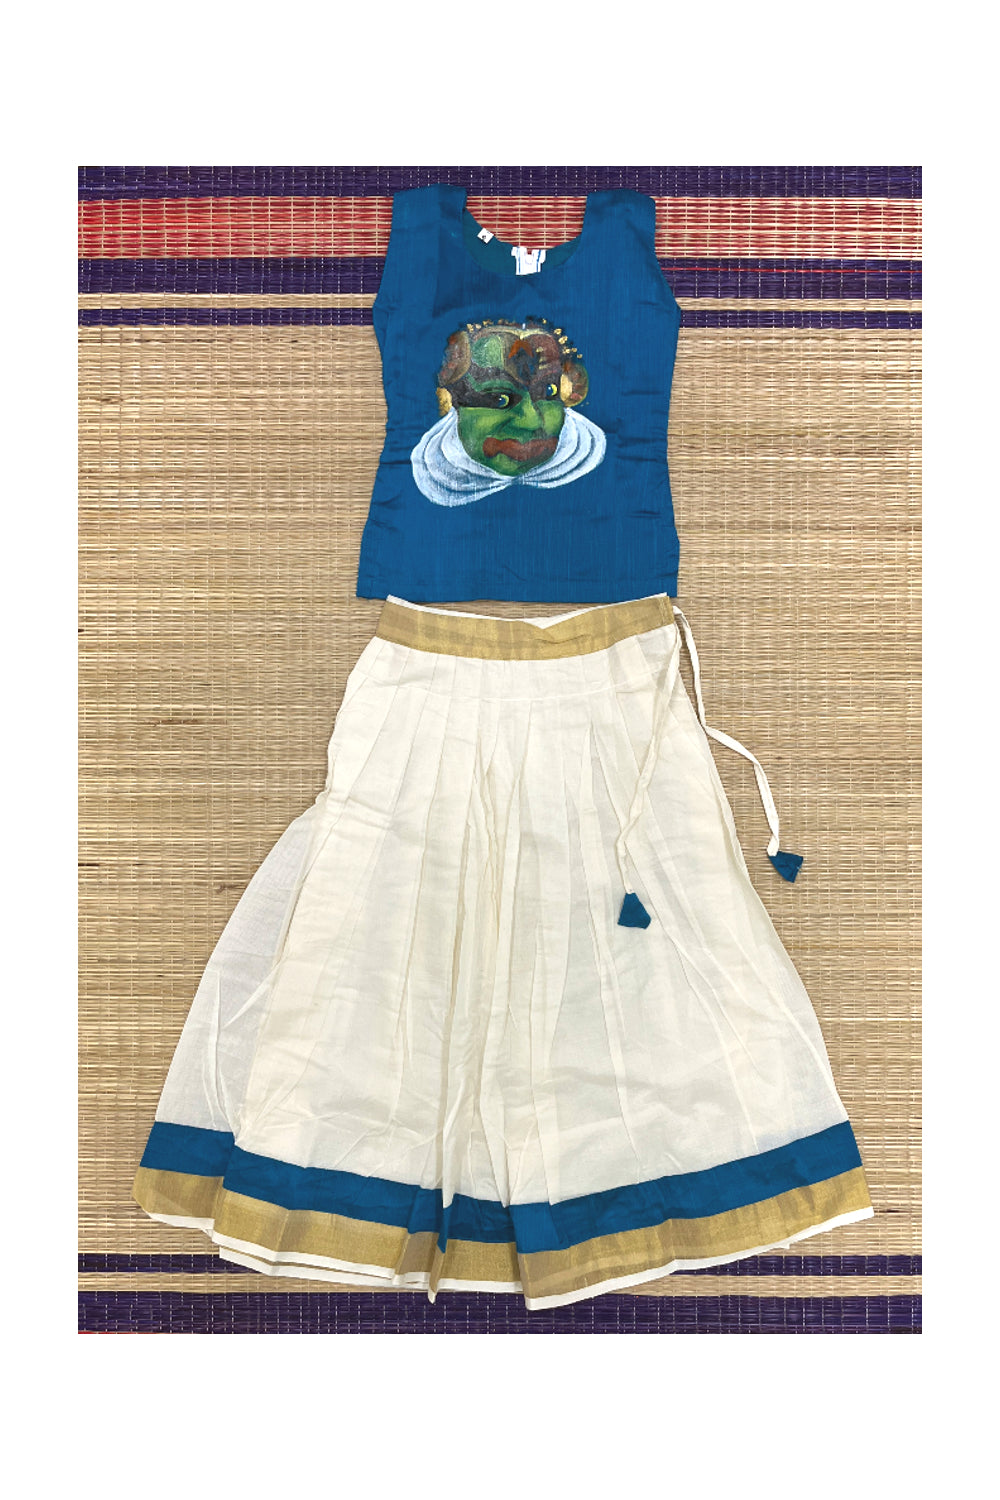 Southloom Kerala Pavada Blue Blouse with Kathakali Mural Designs (Age - 6 Years)